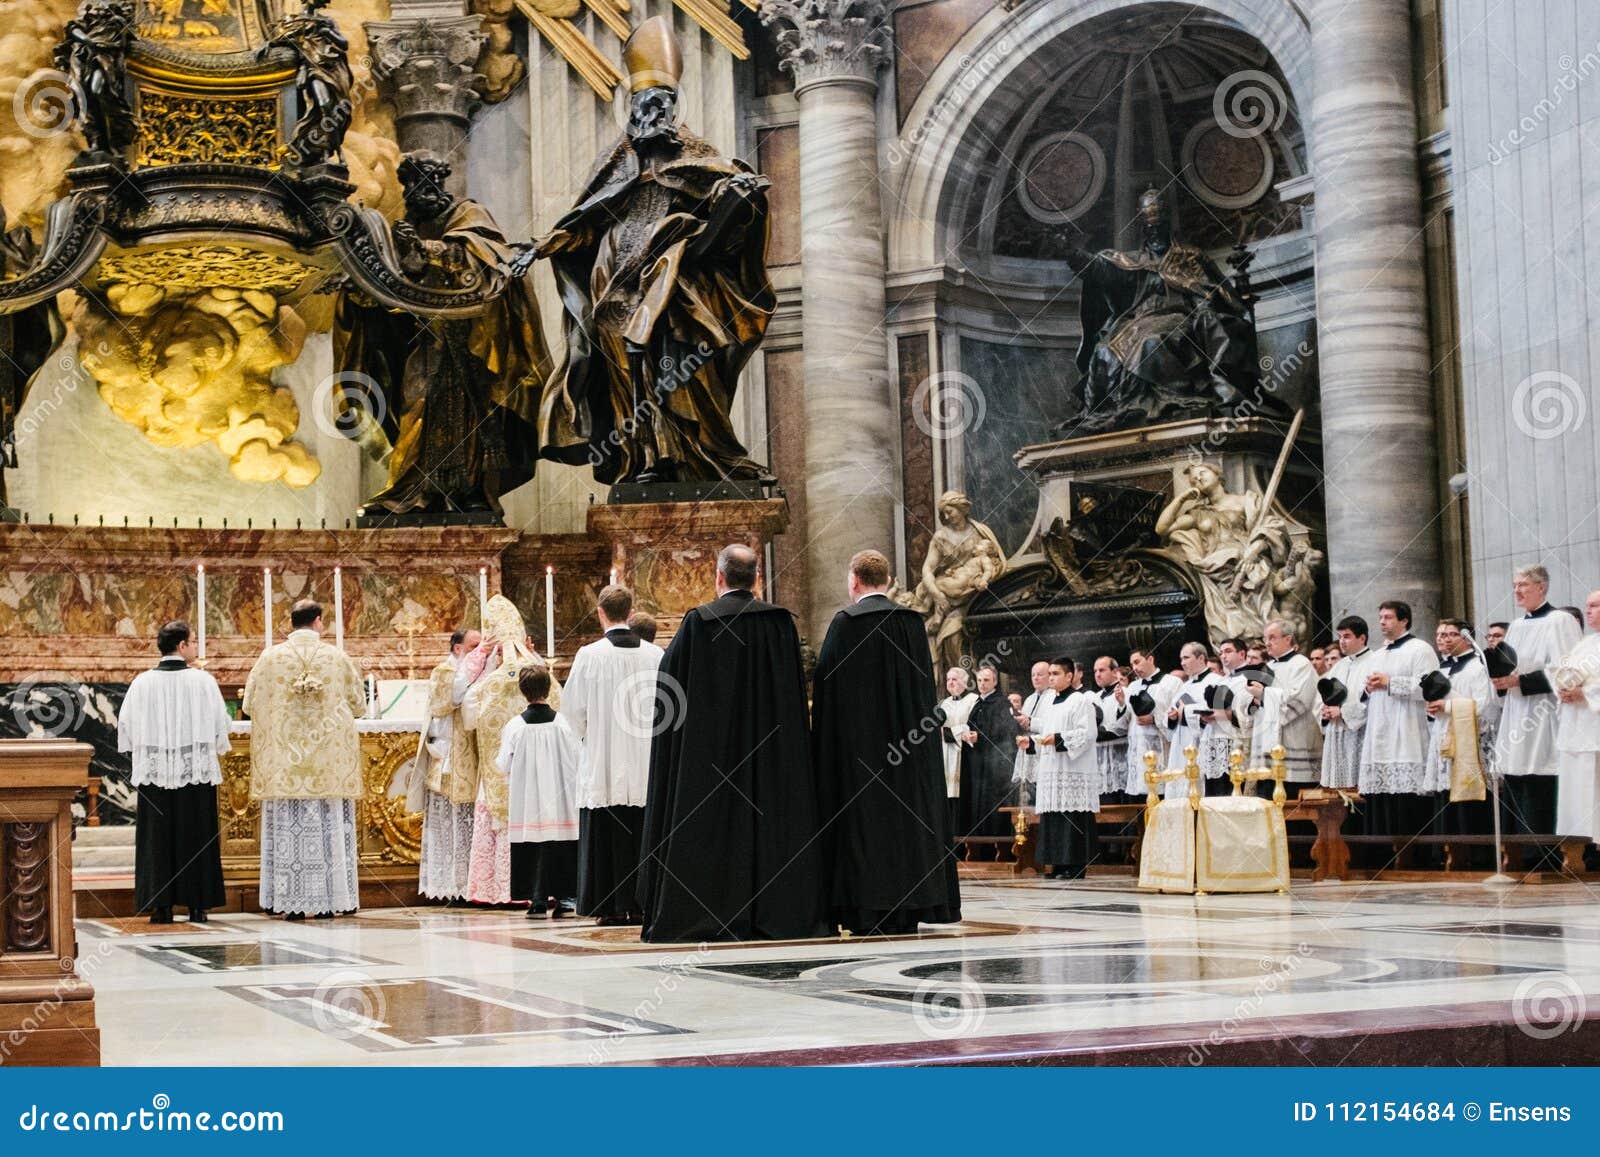 45 Best Pictures Chair Of St Peter Prayer / Feast Of The Chair Of Saint Peter Apostle Vatican News